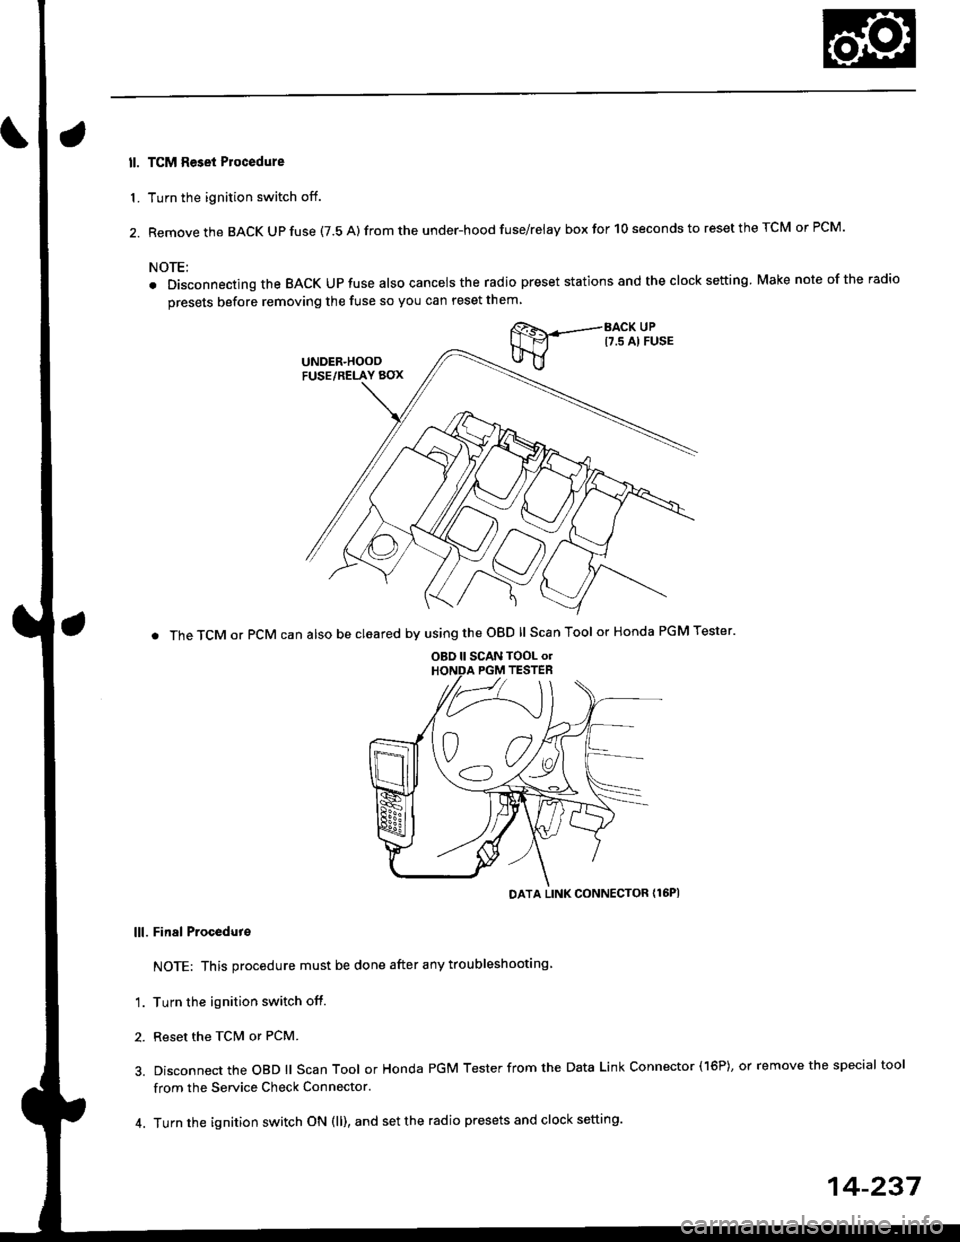 HONDA CIVIC 2000 6.G Workshop Manual ll. TCM Reset Plocedure
1. Turn the ignition switch off.
2. Remove the BACK Up fuse (7.5 A) from the under-hood fuse/relay box for 10 seconds to reset the TCM or PCM.
NOTE:
. Disconnecting the BACK UP